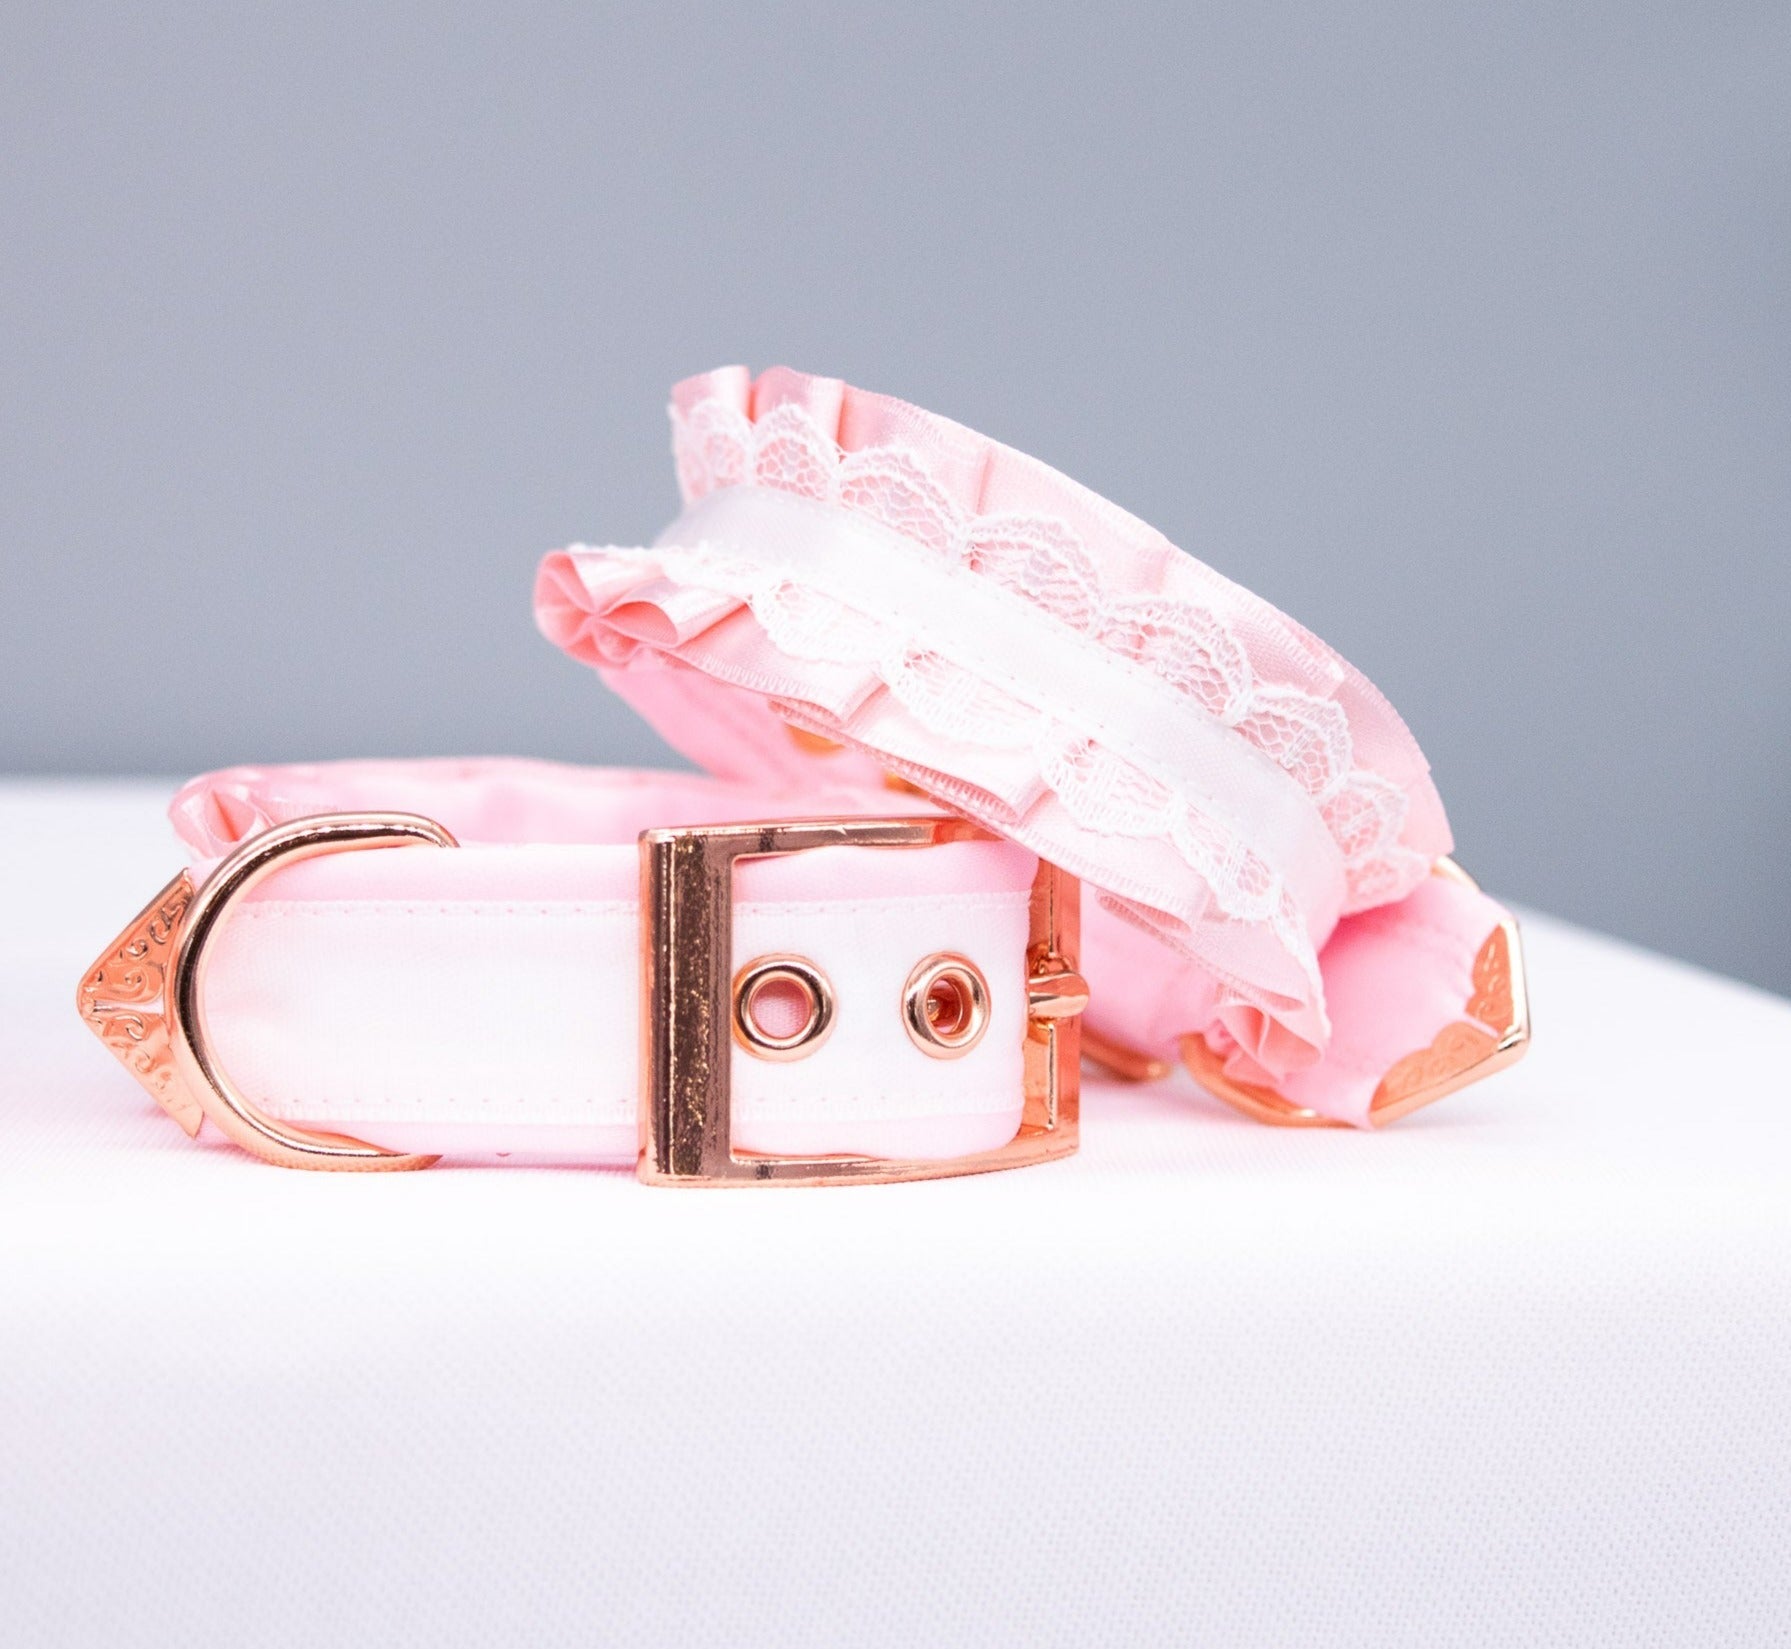 6" - 8" Pink and White Lace - Rose Gold BDSM Cuffs